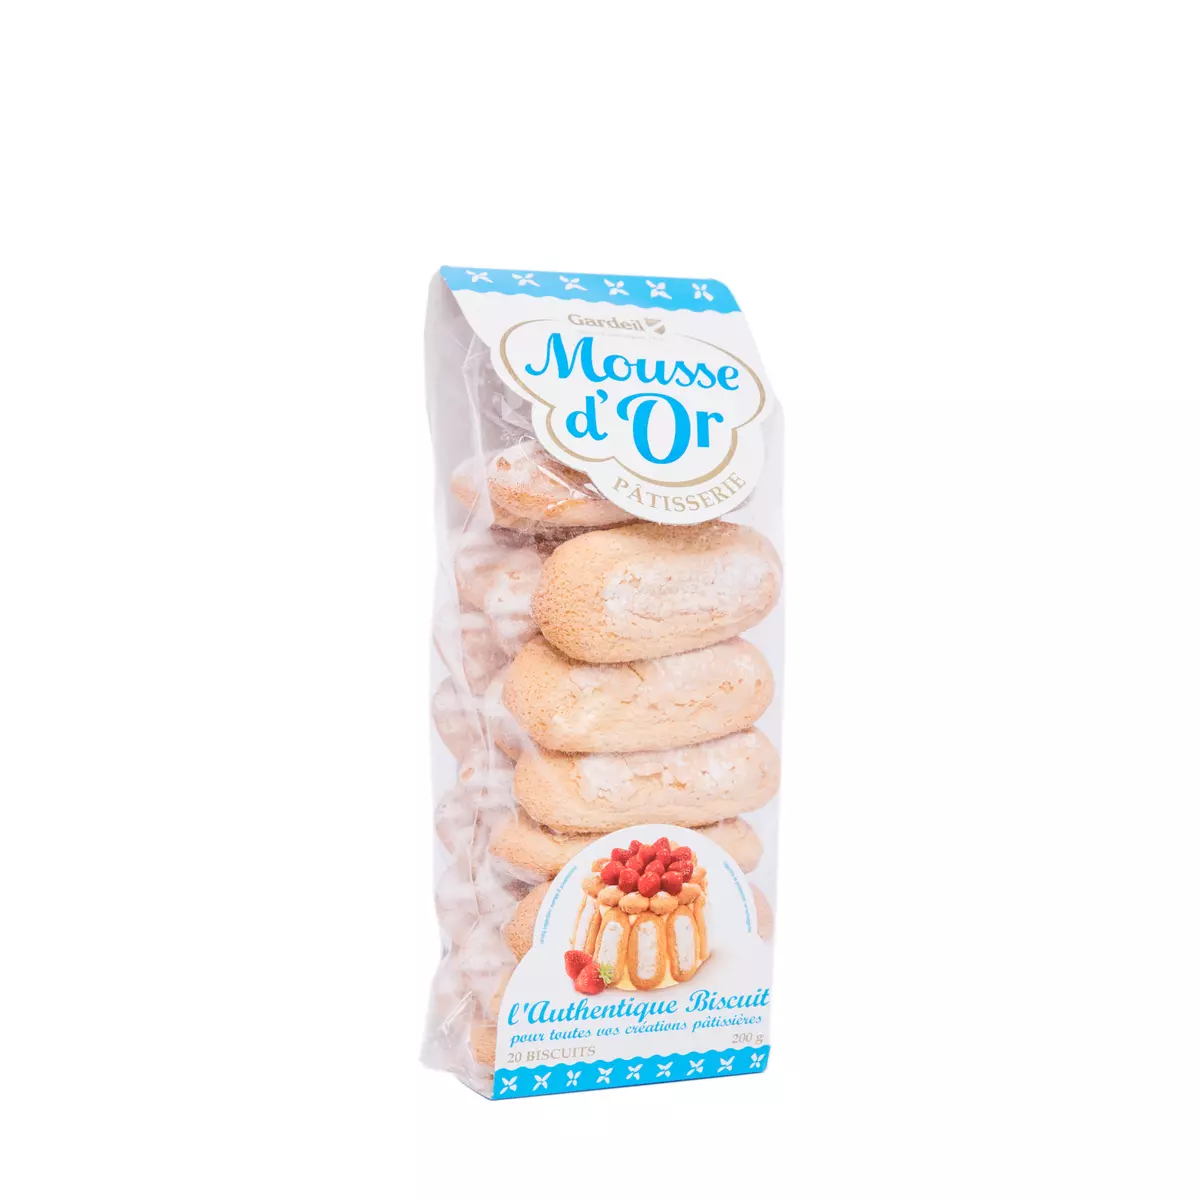 MOUSSE D'OR Biscuits cuillère sachet 20 biscuits 200g pas cher 